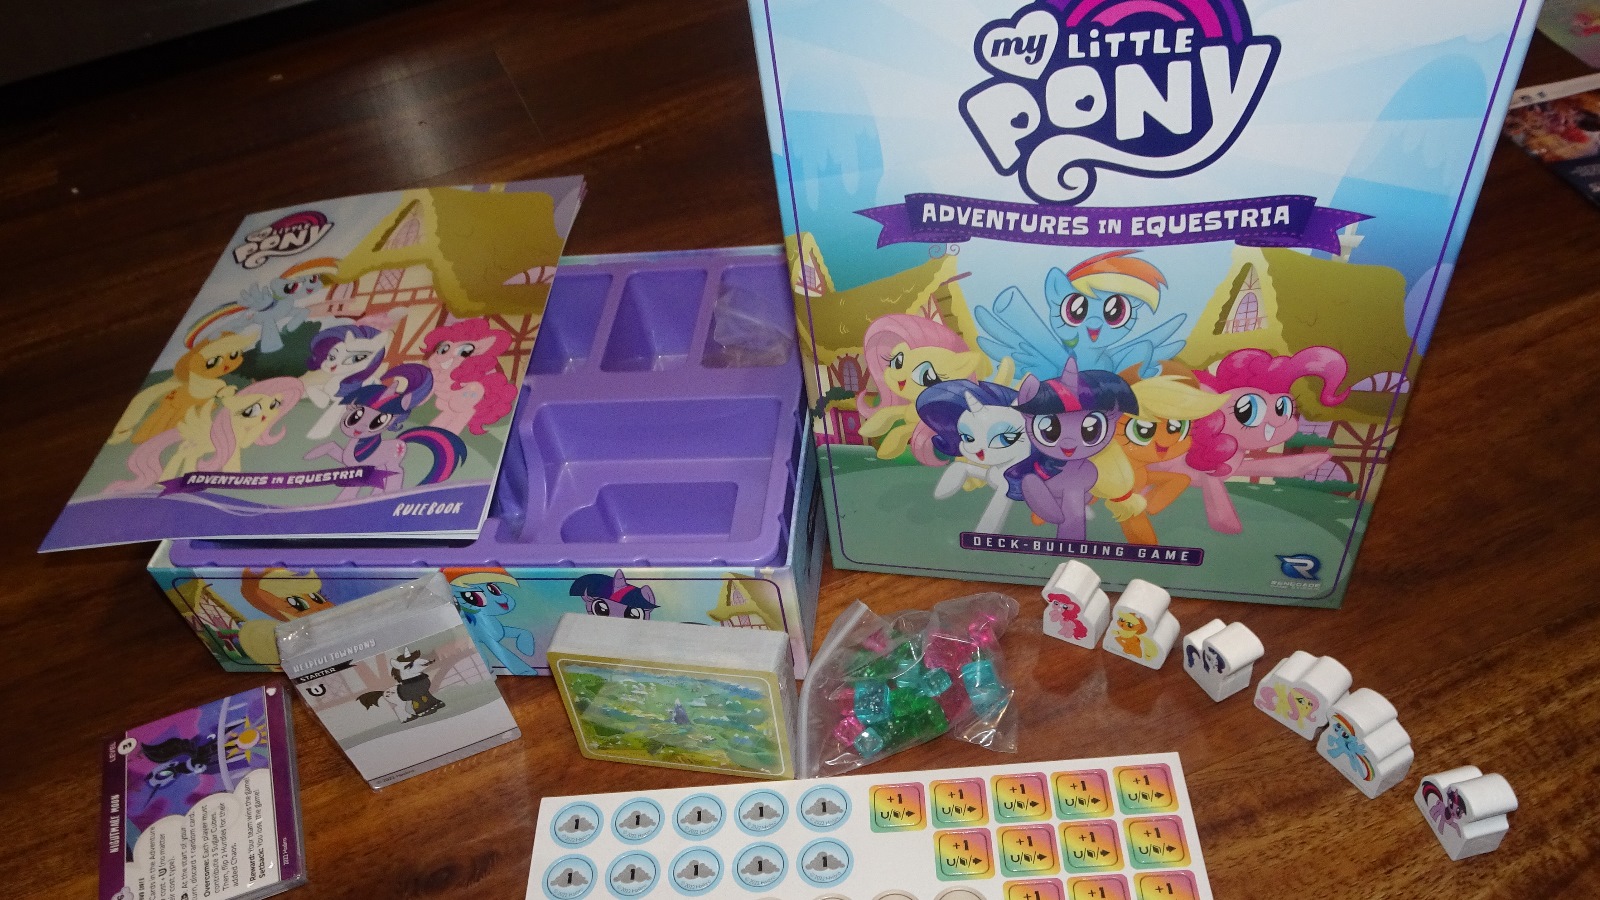 My Little Pony: Adventures in Equestria Deck-Building Game – A Co-op deck that too demanding for kids - GAMING TREND